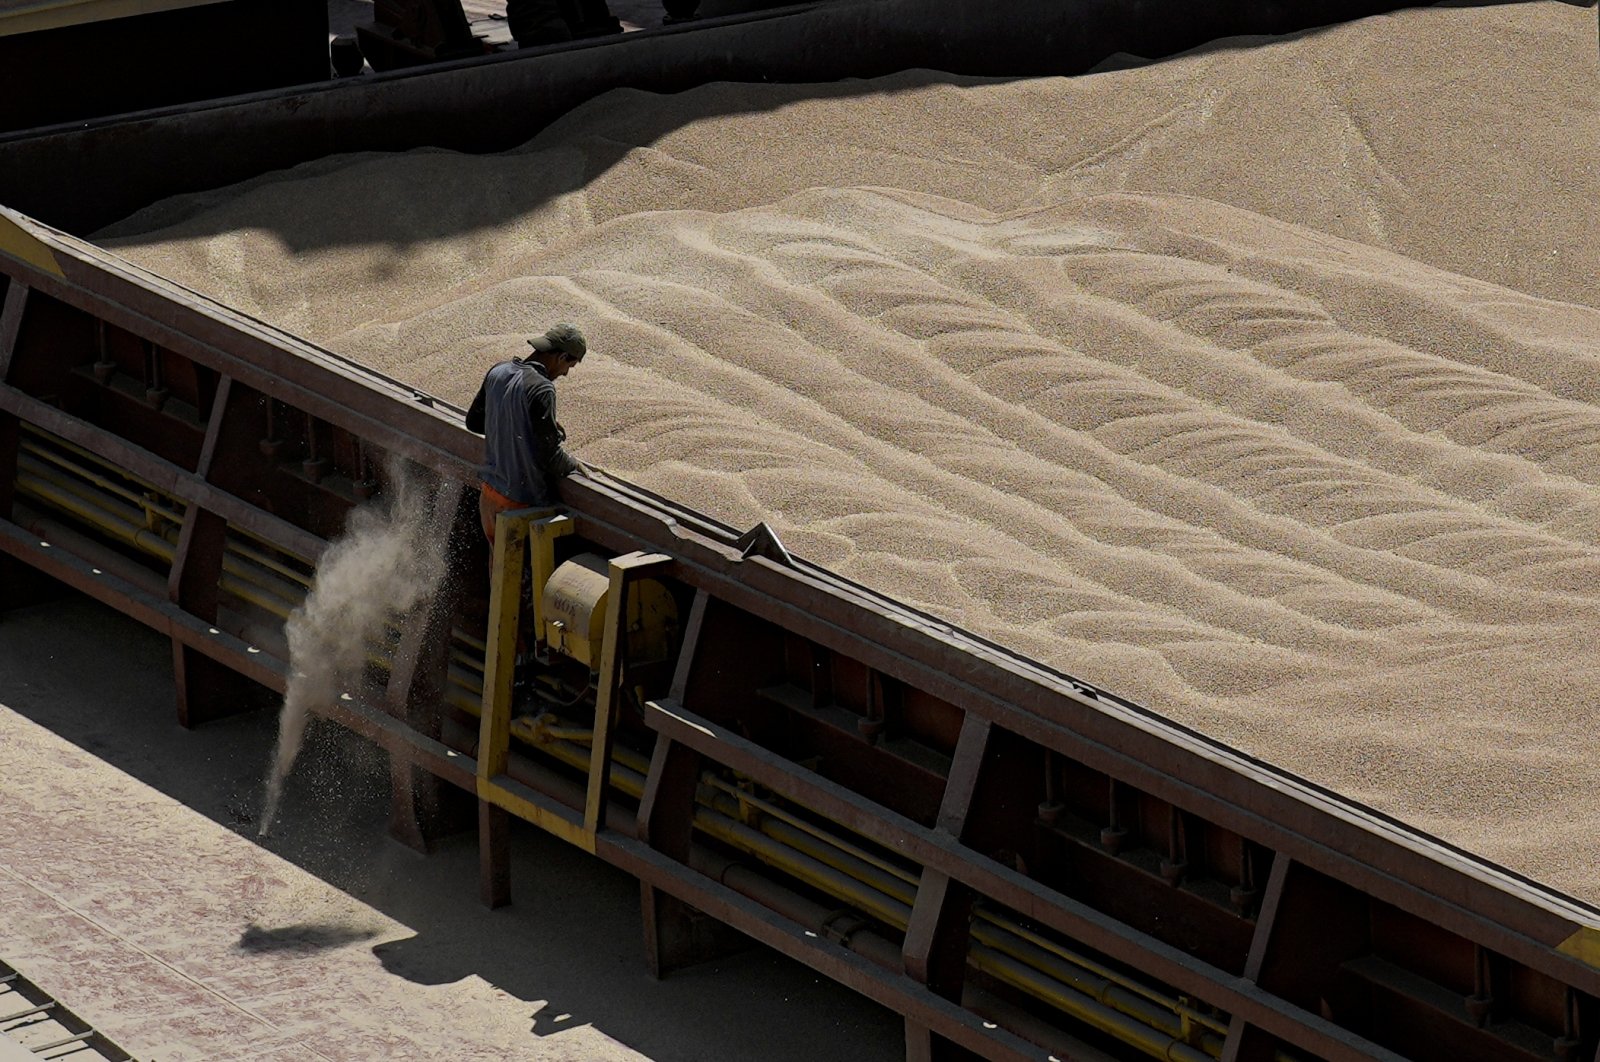 An employee of the Romanian grain handling operator Comvex oversees the unloading of Ukrainian grain from a barge in the Black Sea port of Constanta, Romania, June 21, 2022. (AP Photo)